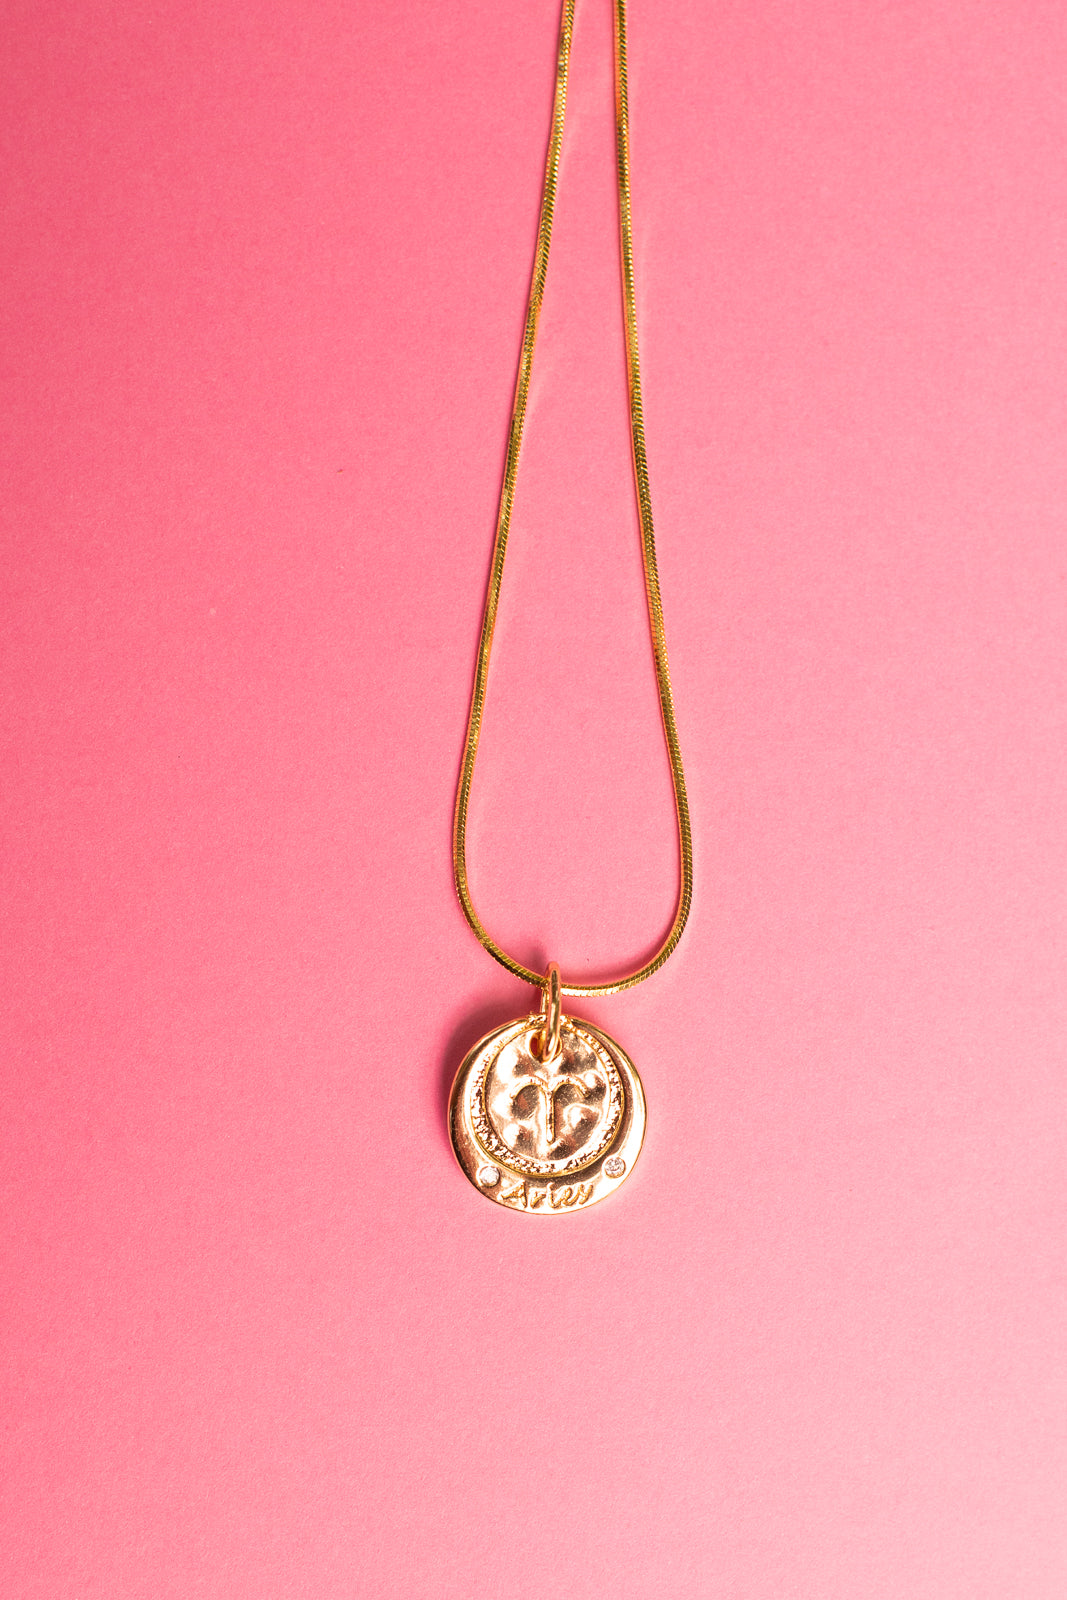 Zodiac Coin Necklace *GOLD FILLED*